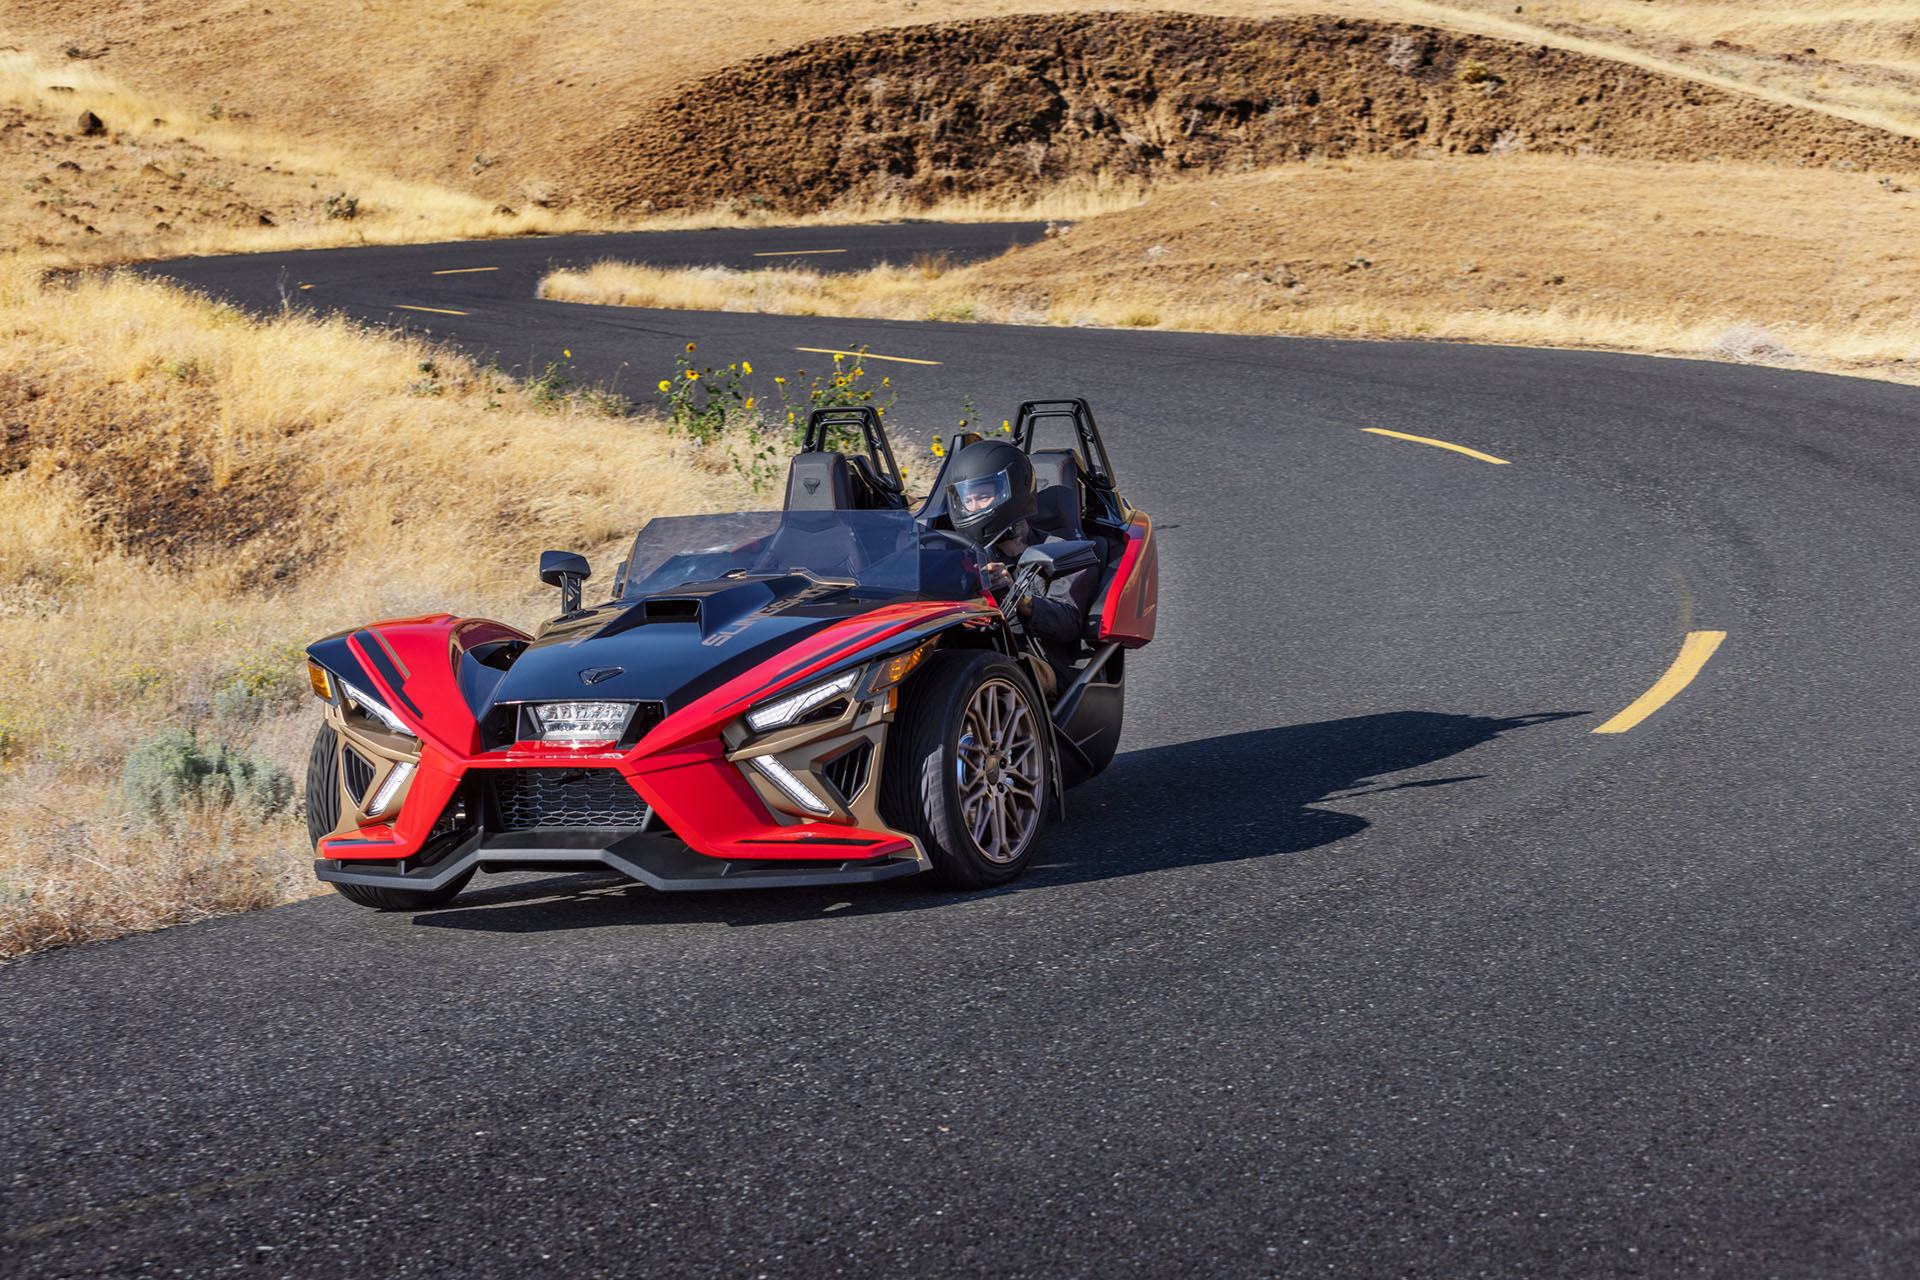 2022 Slingshot Signature Limited Edition AutoDrive in High Point, North Carolina - Photo 6